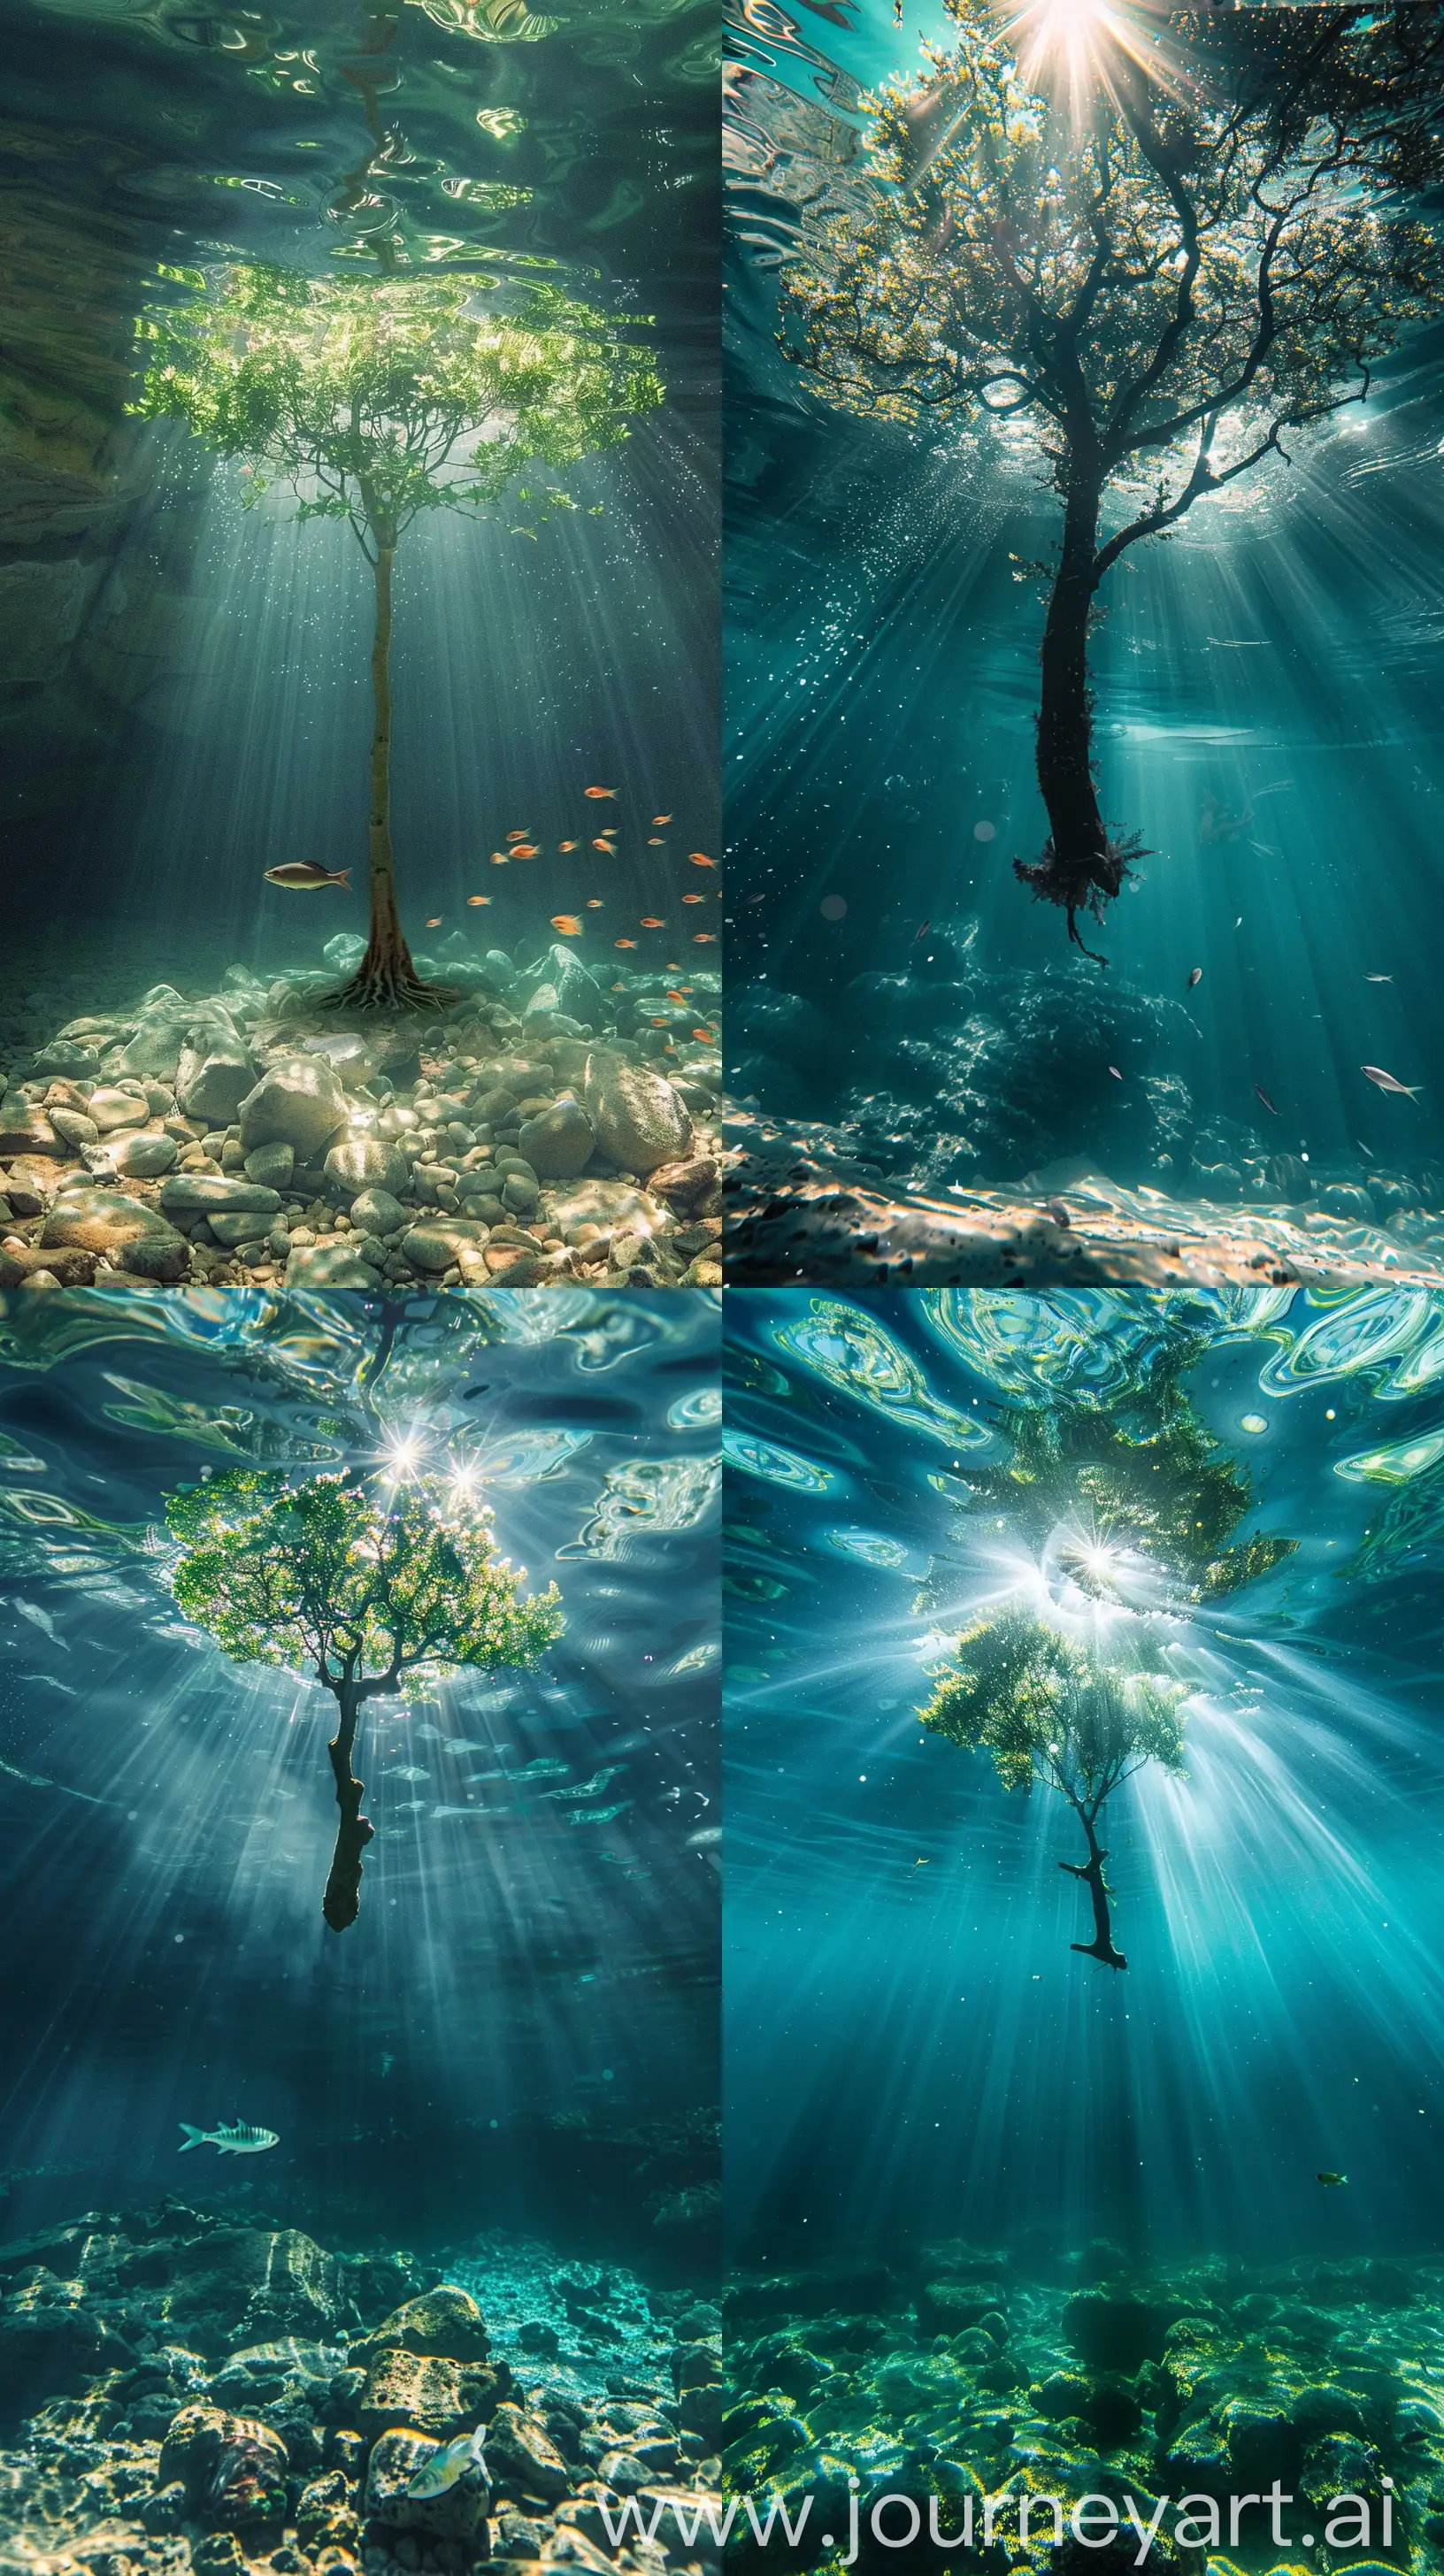 Sunlight-Piercing-Through-Underwater-Pool-with-Tree-and-Fish